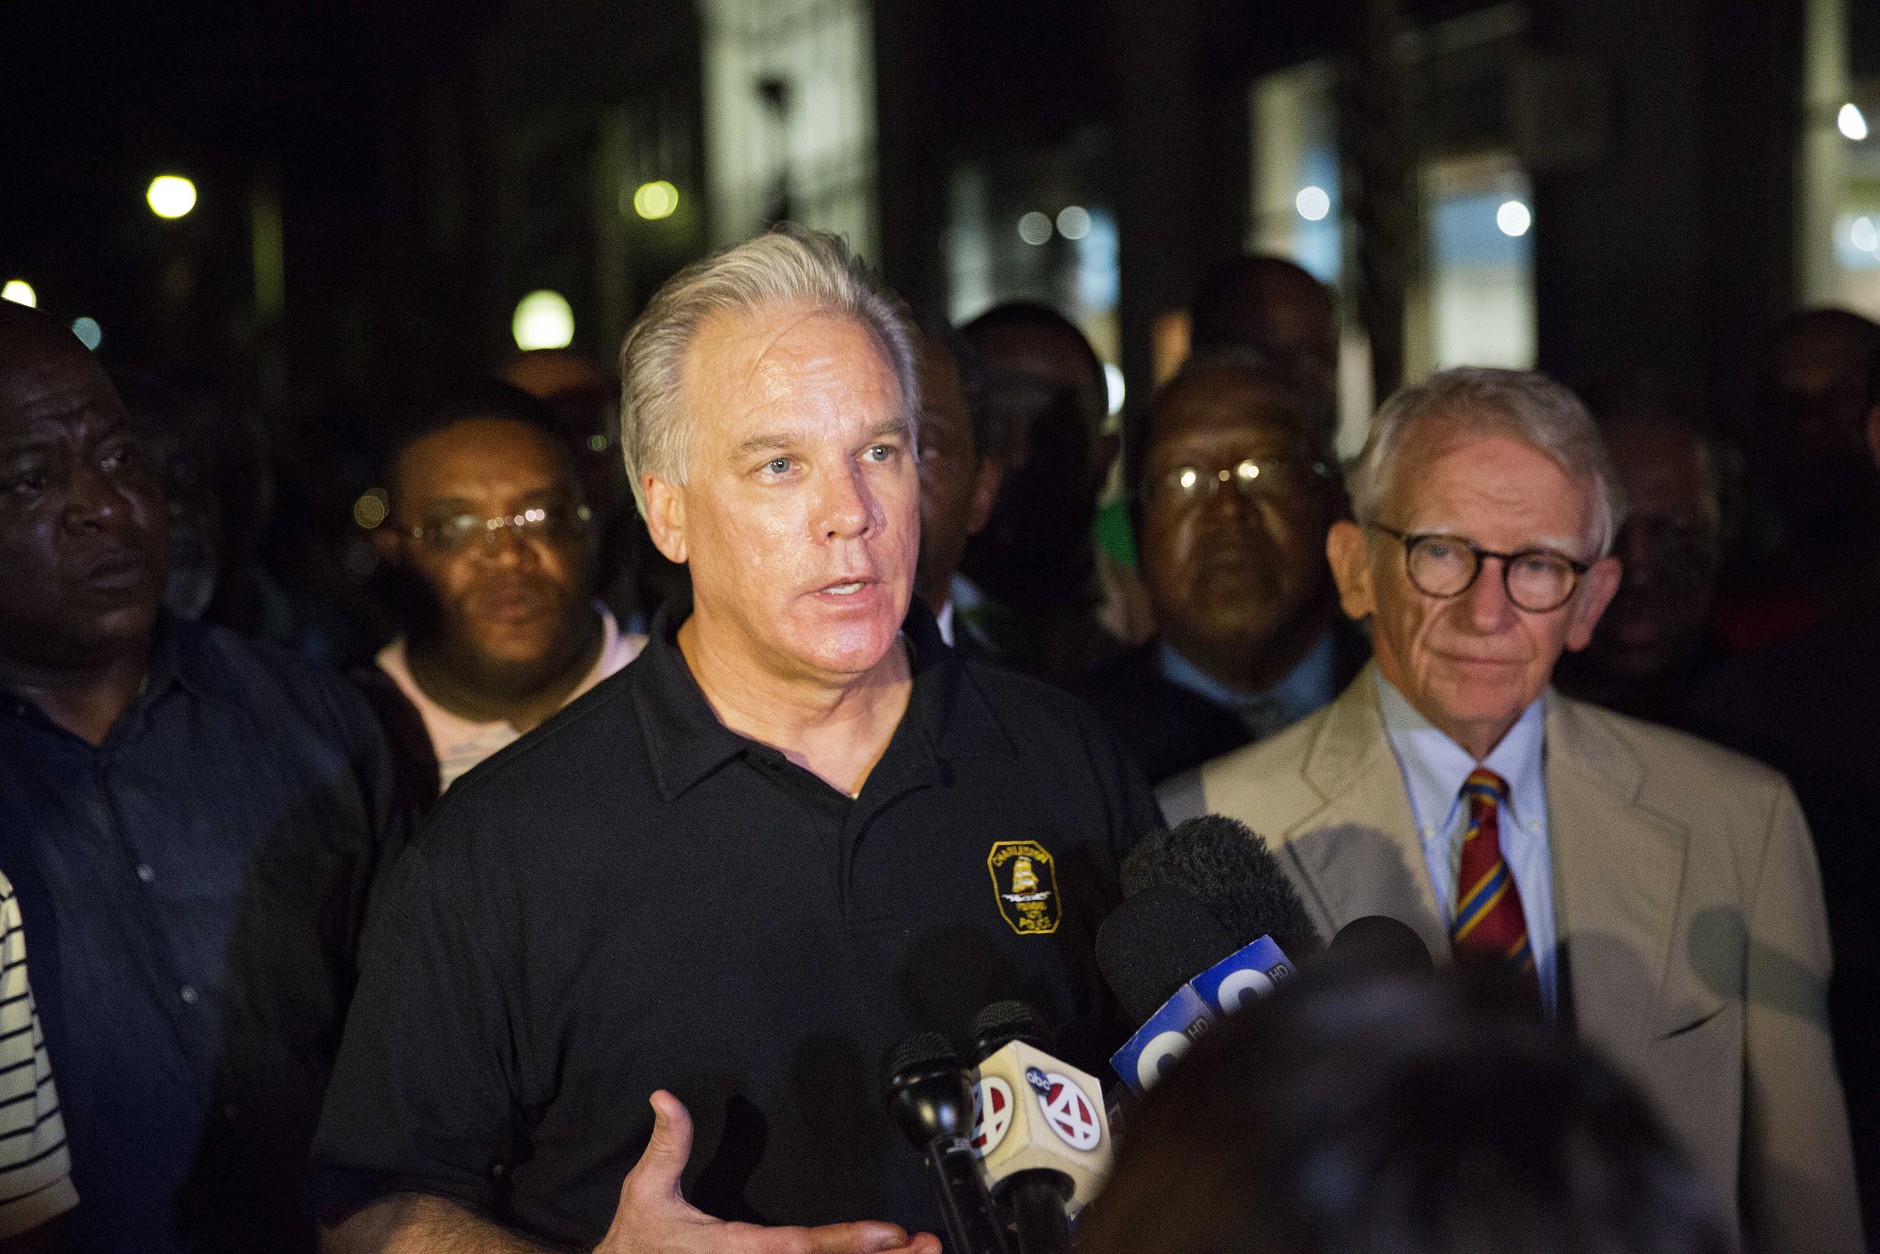 Charleston Police Chief Gregory Mullen, center, addresses the media while joined by Mayor Joseph Riley, right, down the street from the Emanuel AME Church early Thursday, June 18, 2015 following a shooting Wednesday night in Charleston, S.C. (AP Photo/David Goldman)